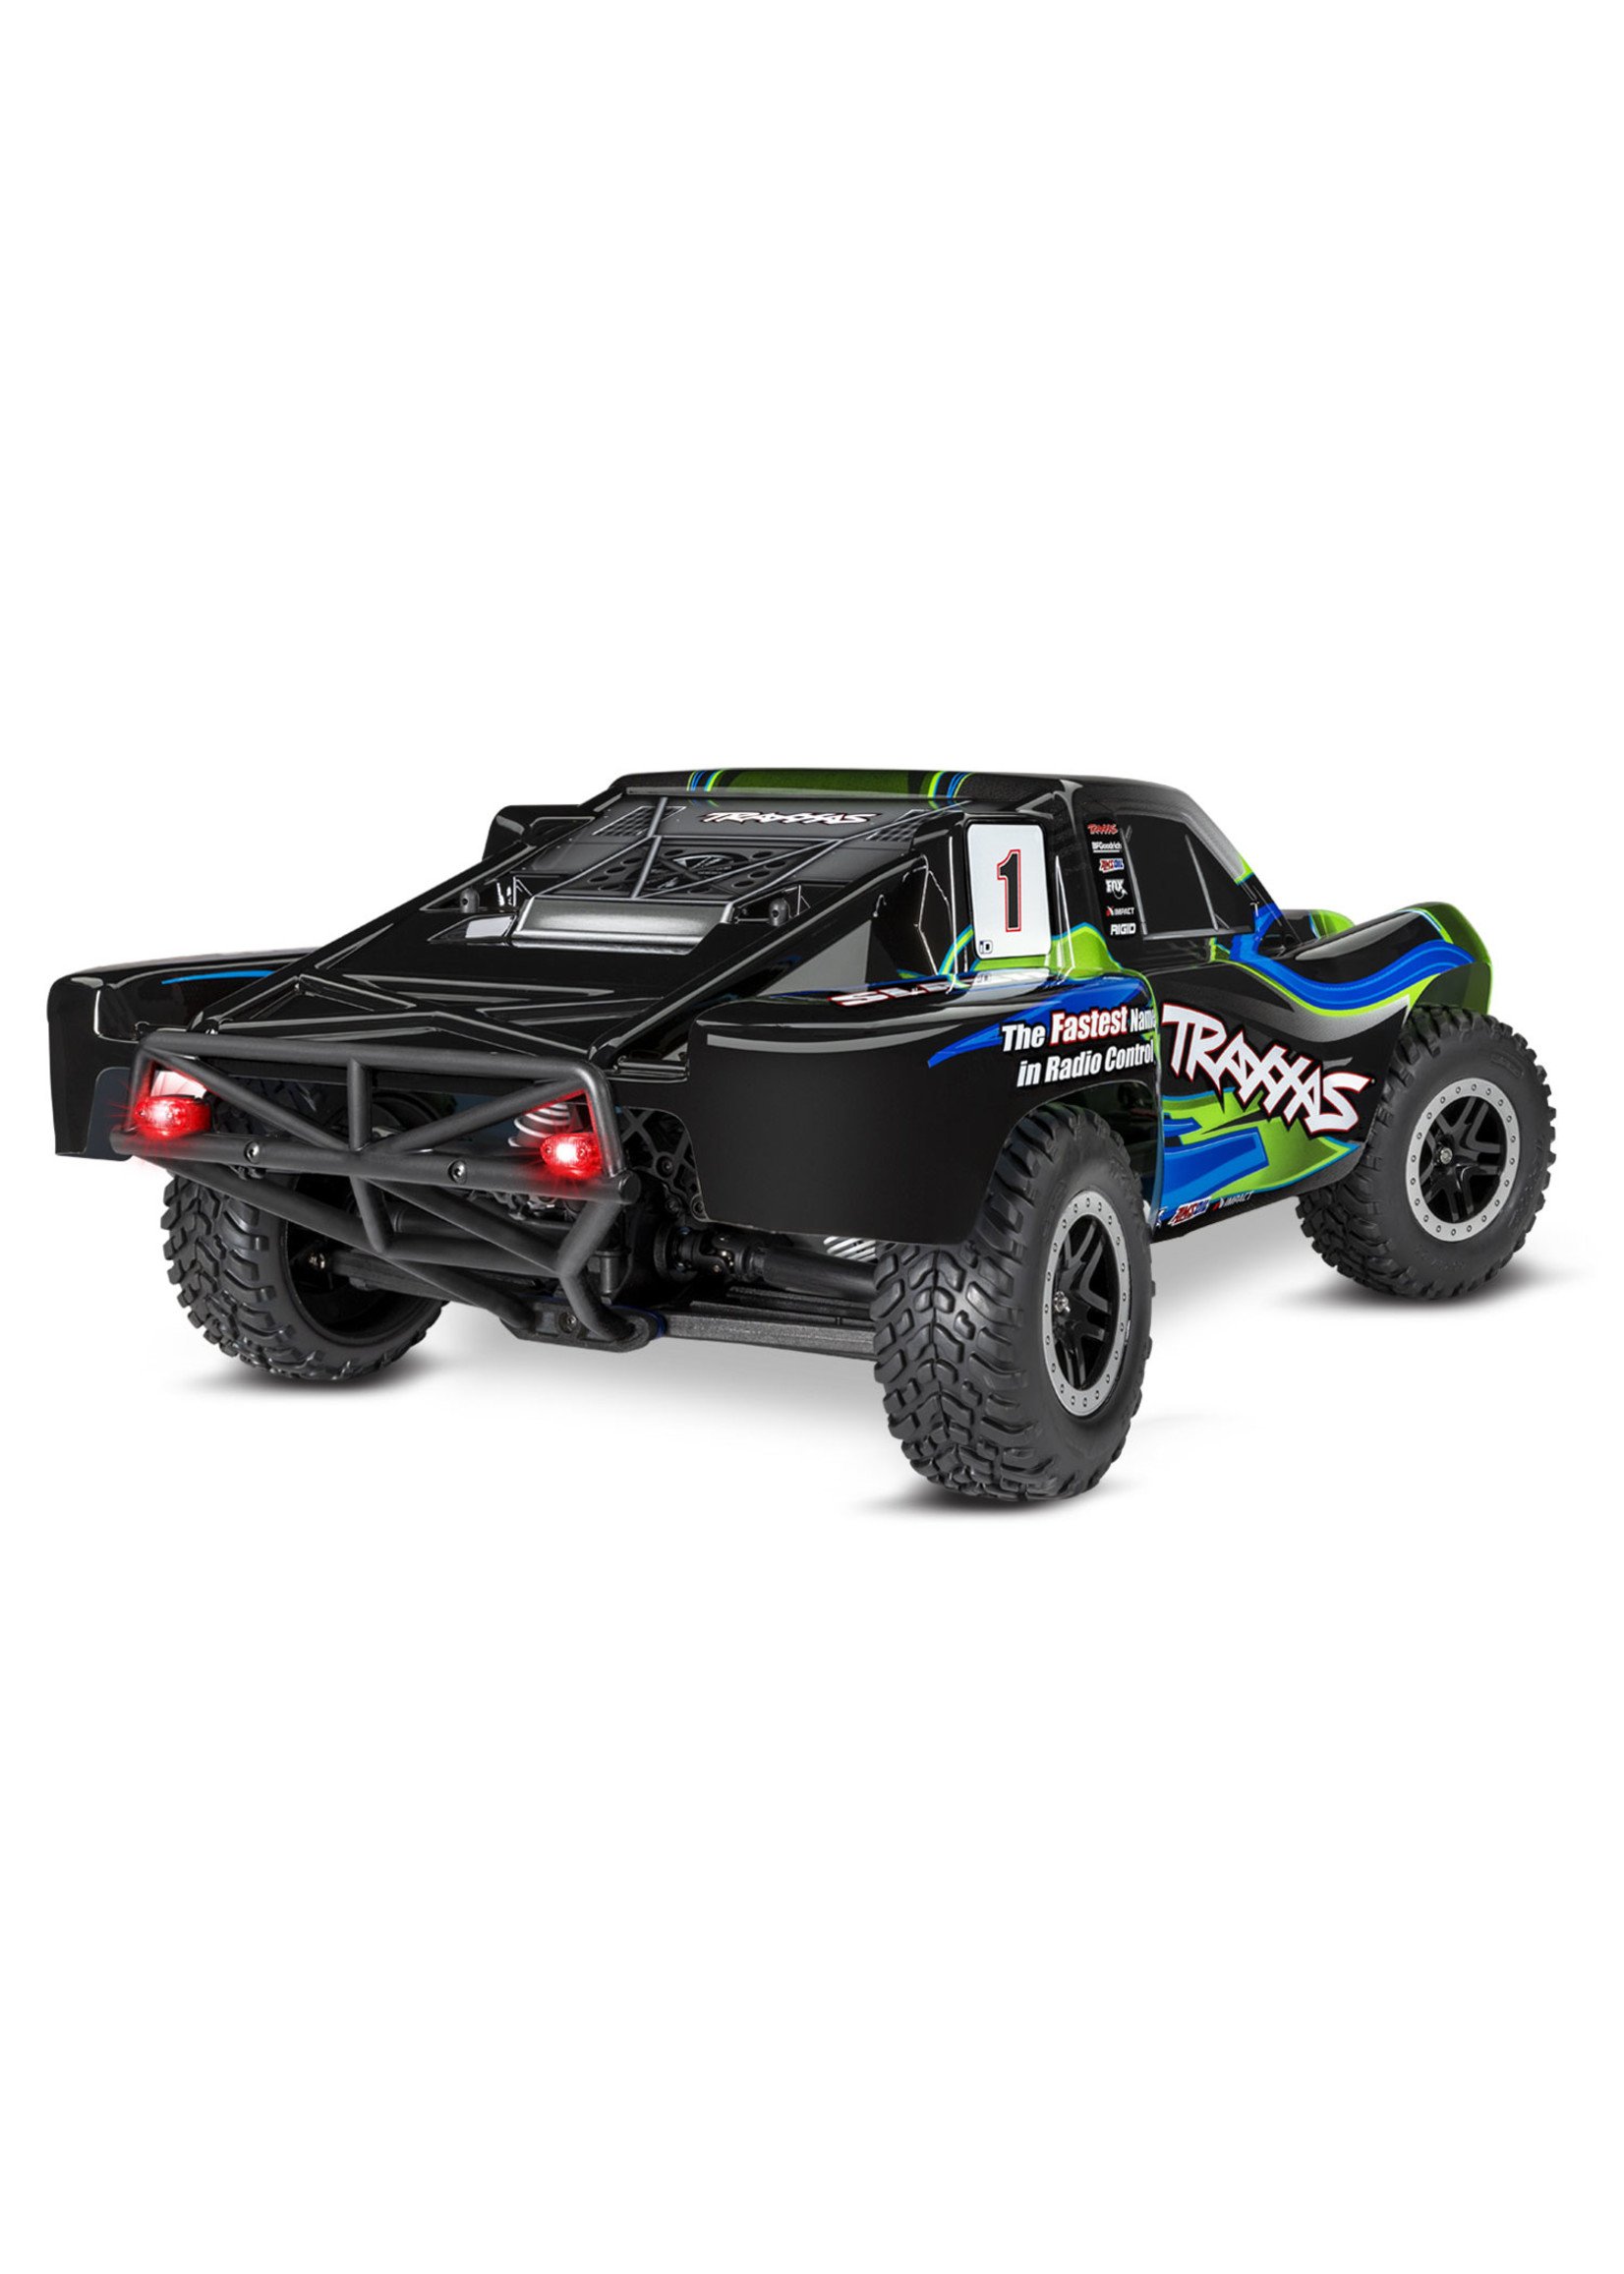 Traxxas 1/10 Slash 4X4 RTR Brushed SCT with LED Lights - Green